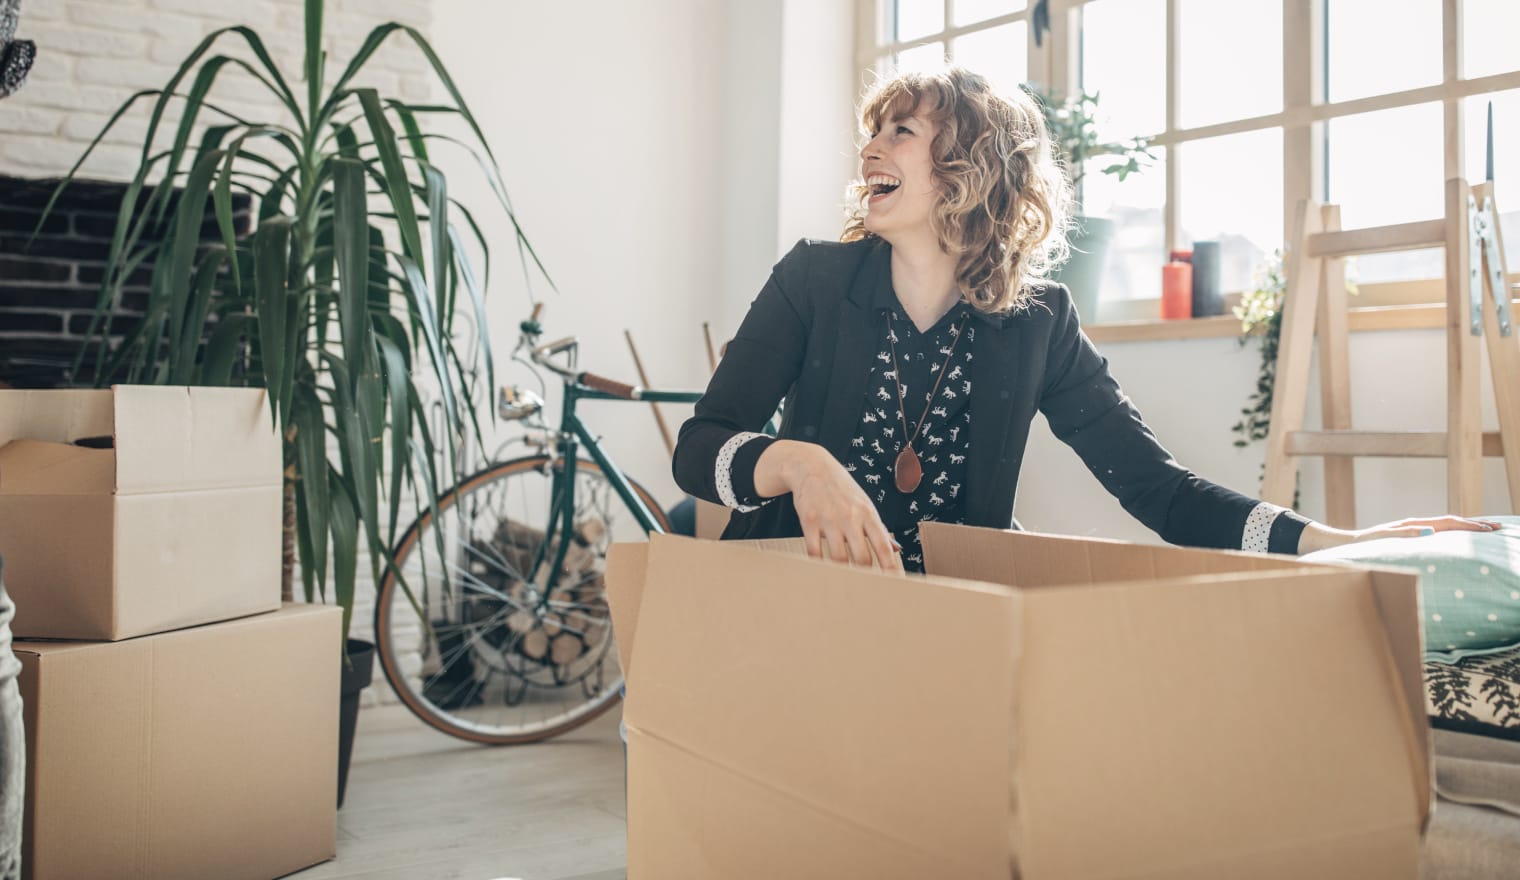 A woman in an apartment laughs as she unpacks a moving box.